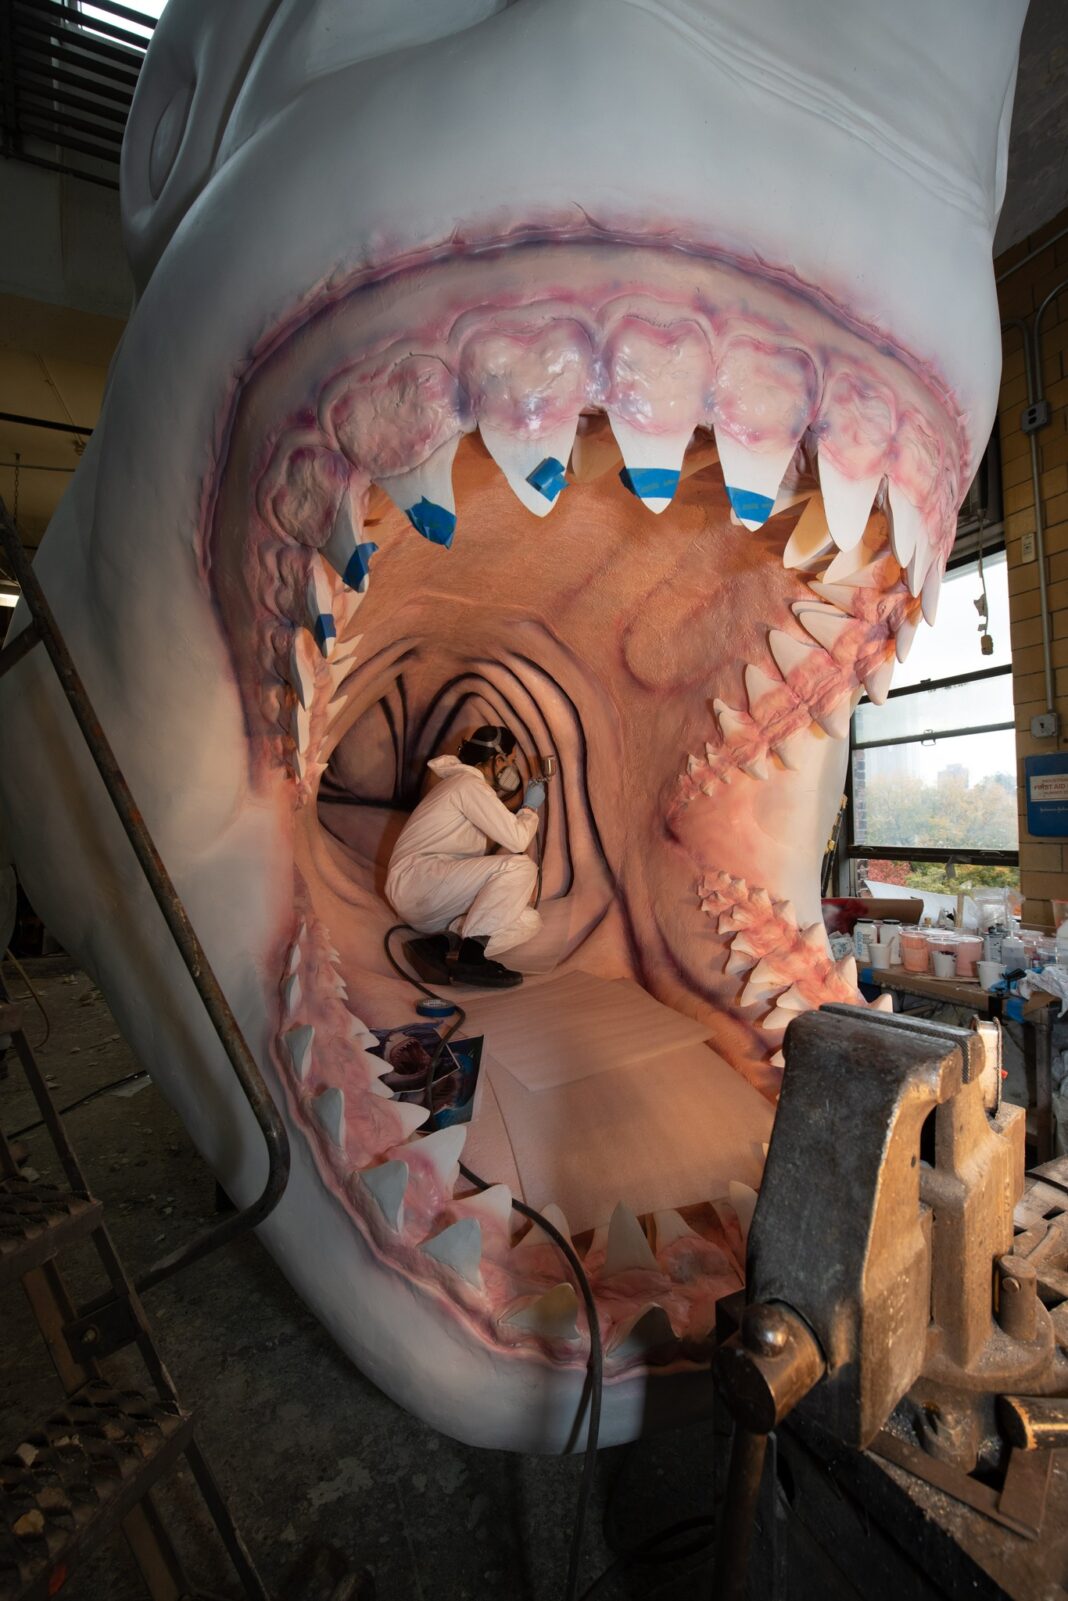 American Museum of Natural History celebrates Shark Awareness Day on Friday